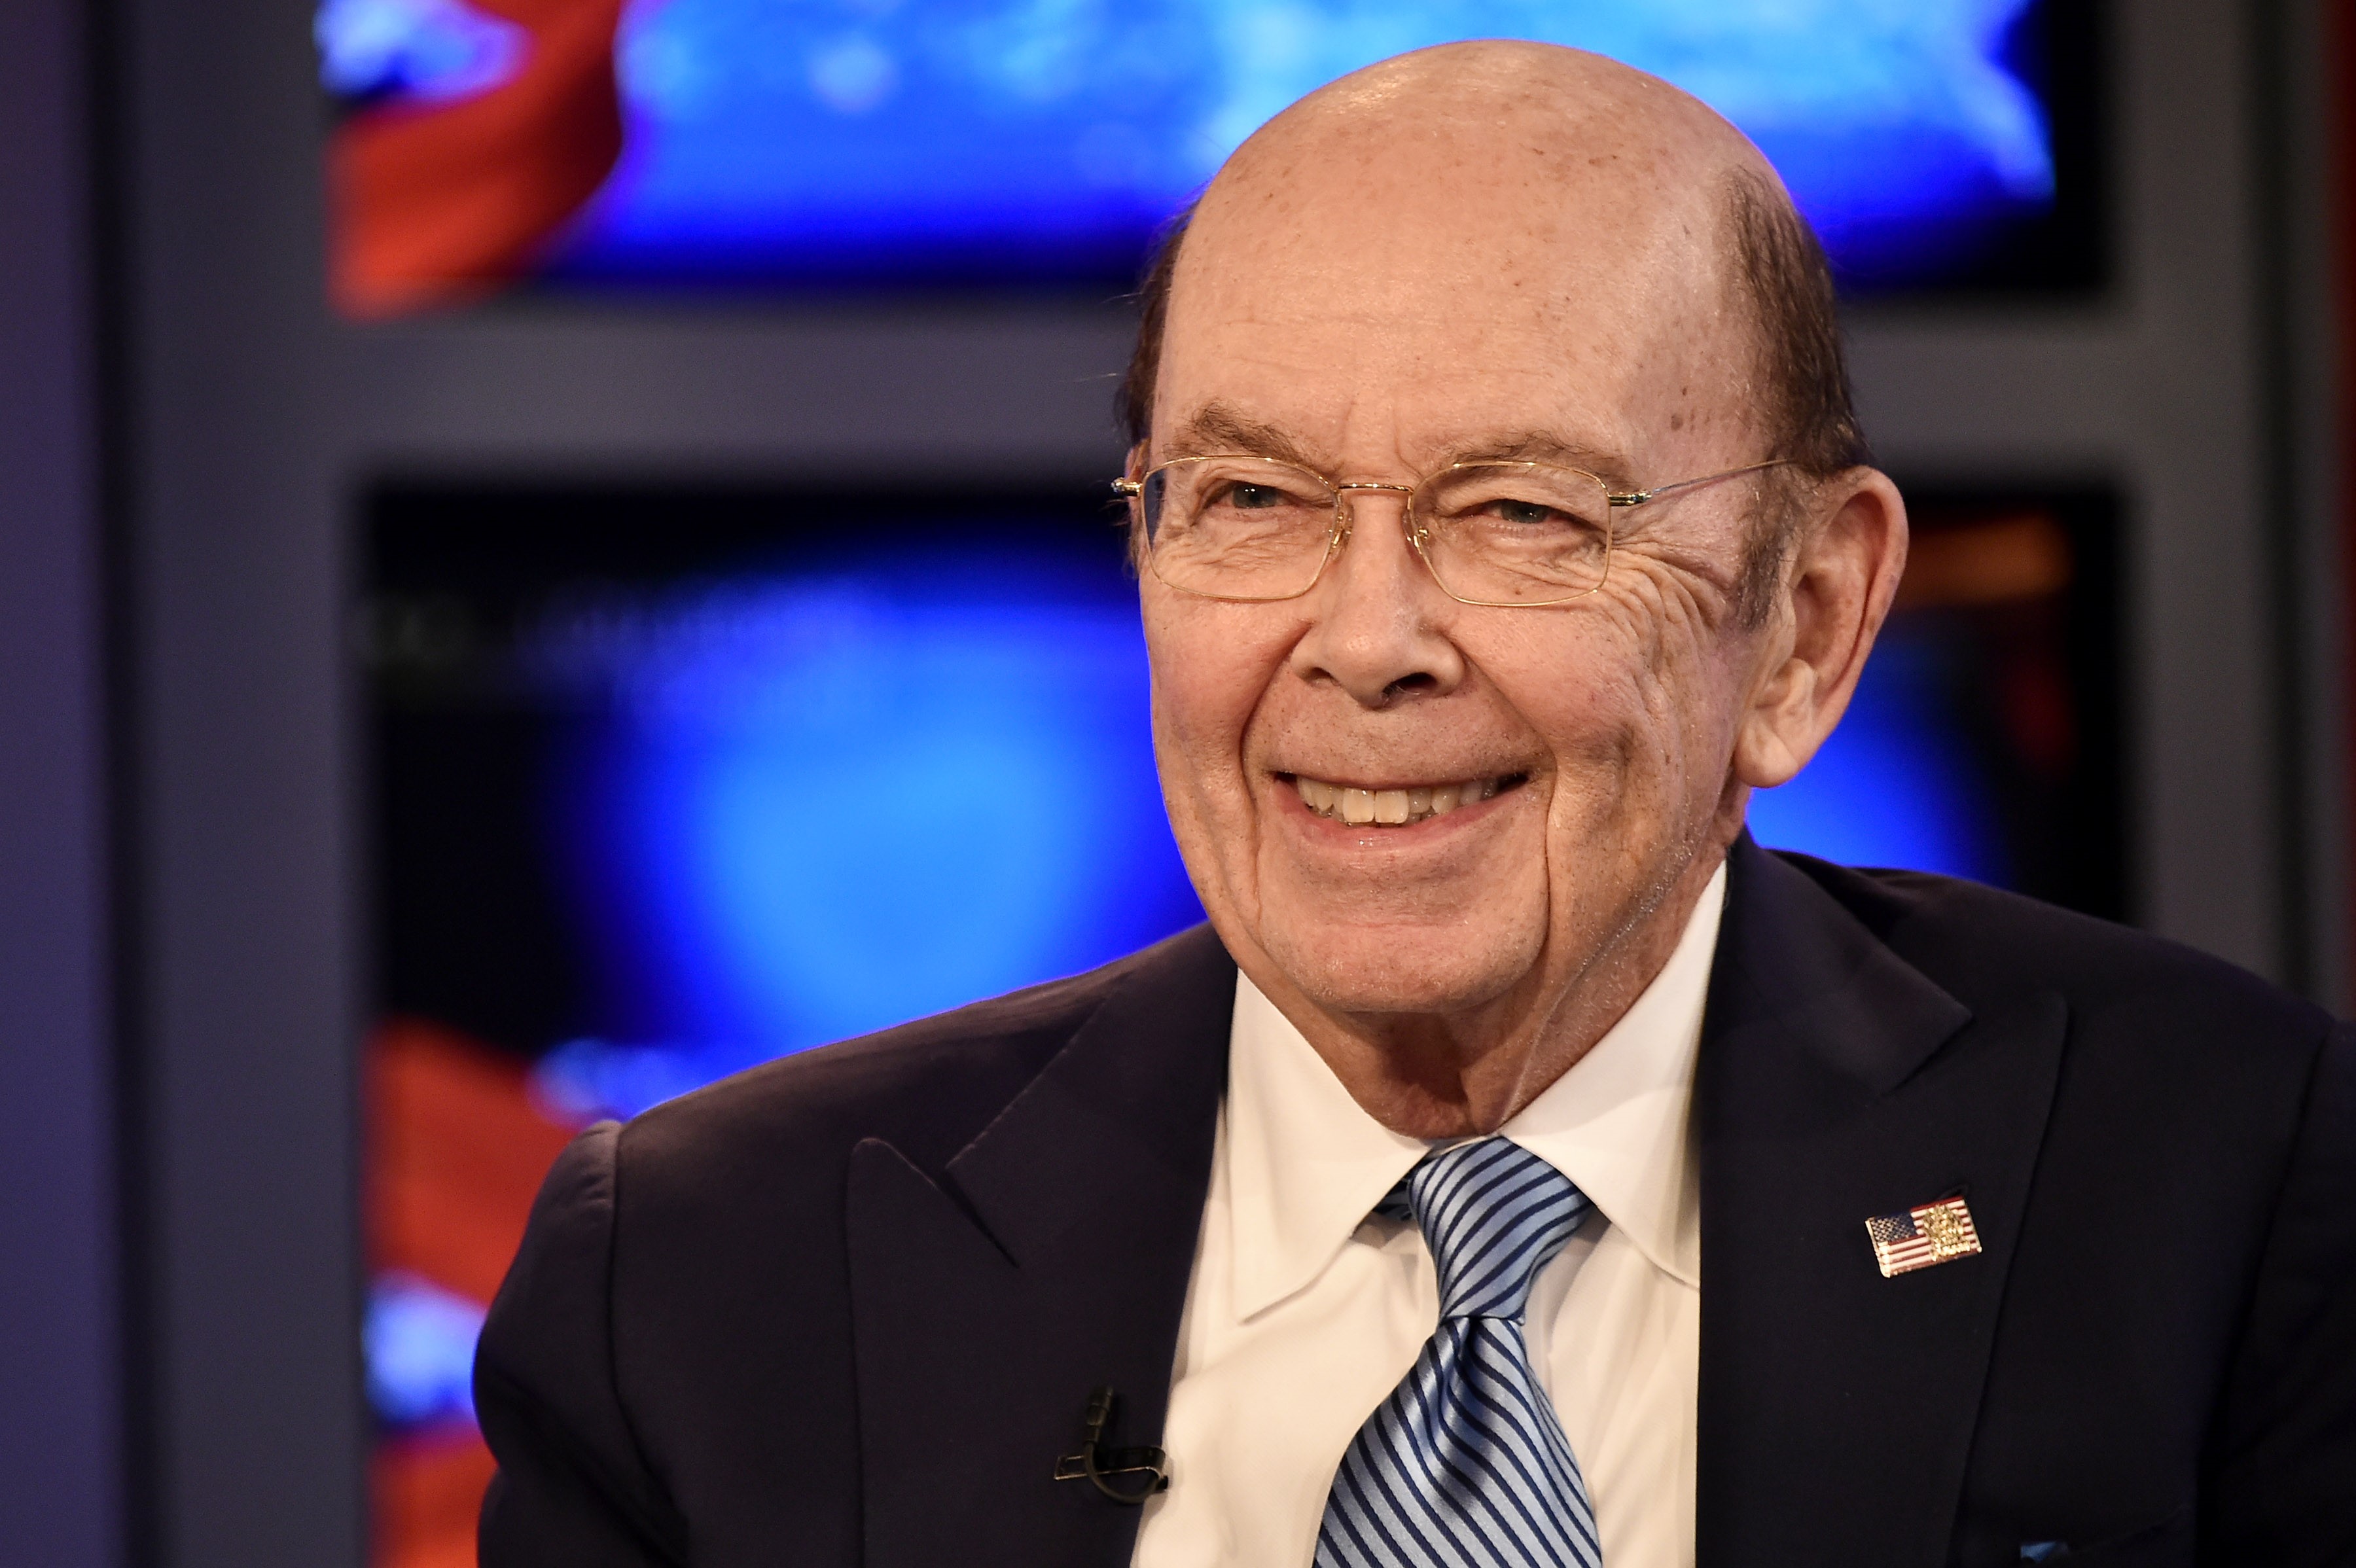 Wilbur Ross hopes to avoid imported automobile tariffs